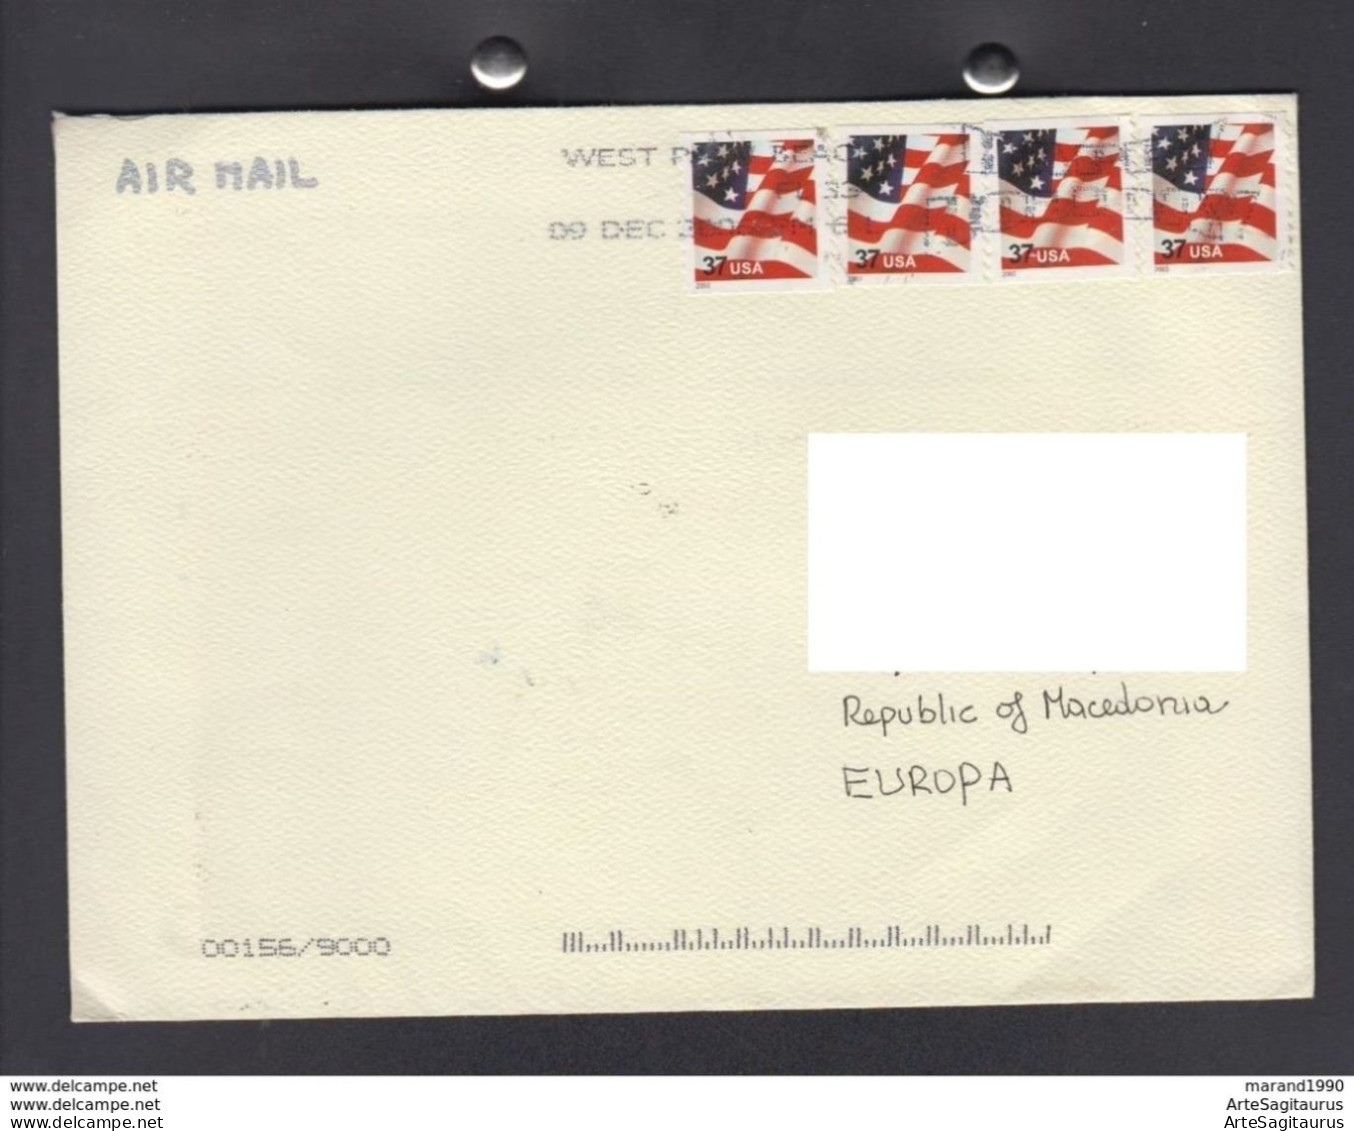 USA, COVER, AIR MAIL, FLAGS, REPUBLIC OF MACEDONIA  (008) - Covers